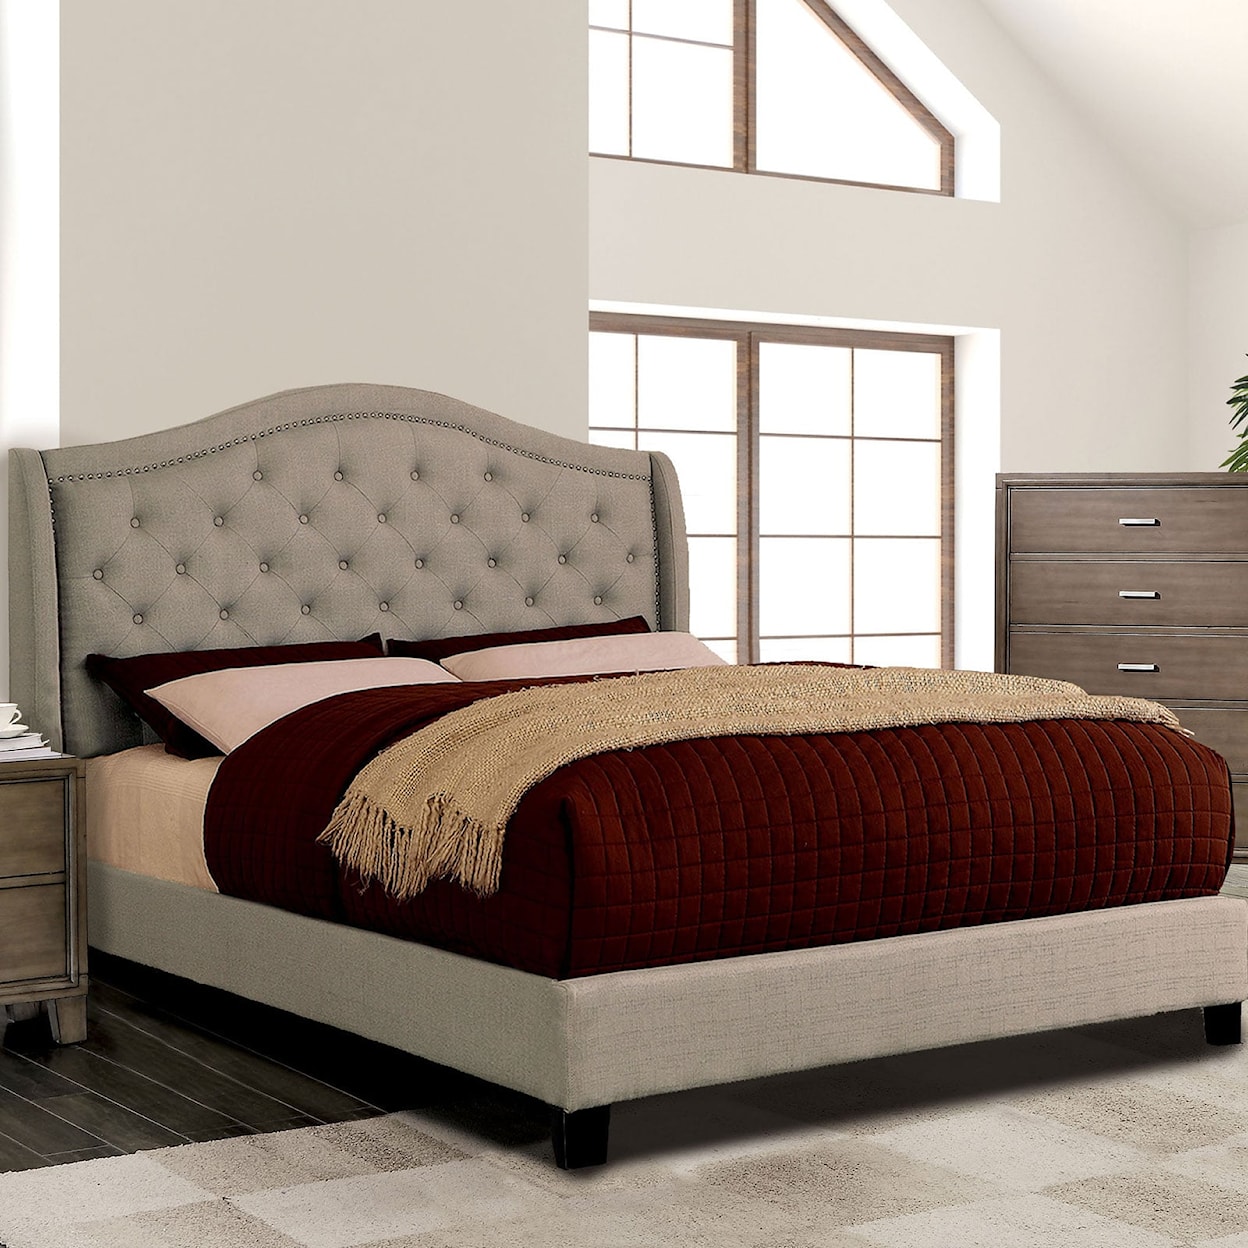 Furniture of America Carly Cal.King Bed, Warm Gray